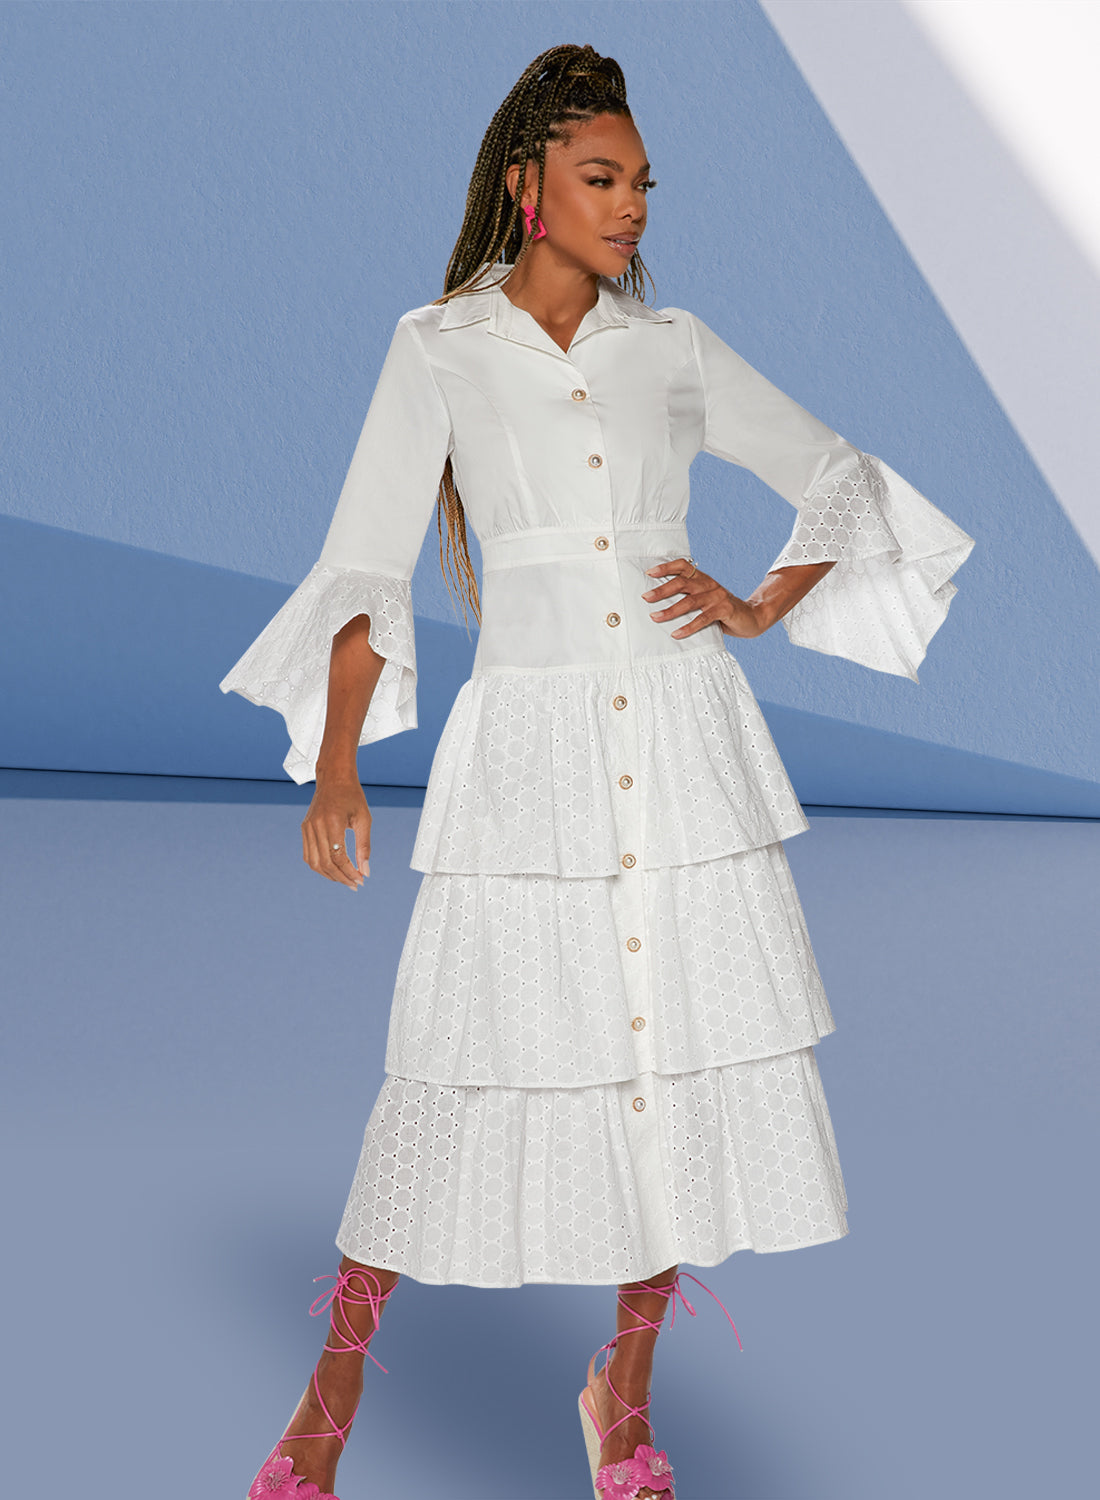 Love the Queen 17528 - White - Button Front Cotton Spandex Fabric with Eyelet Lace Cuffs Dress